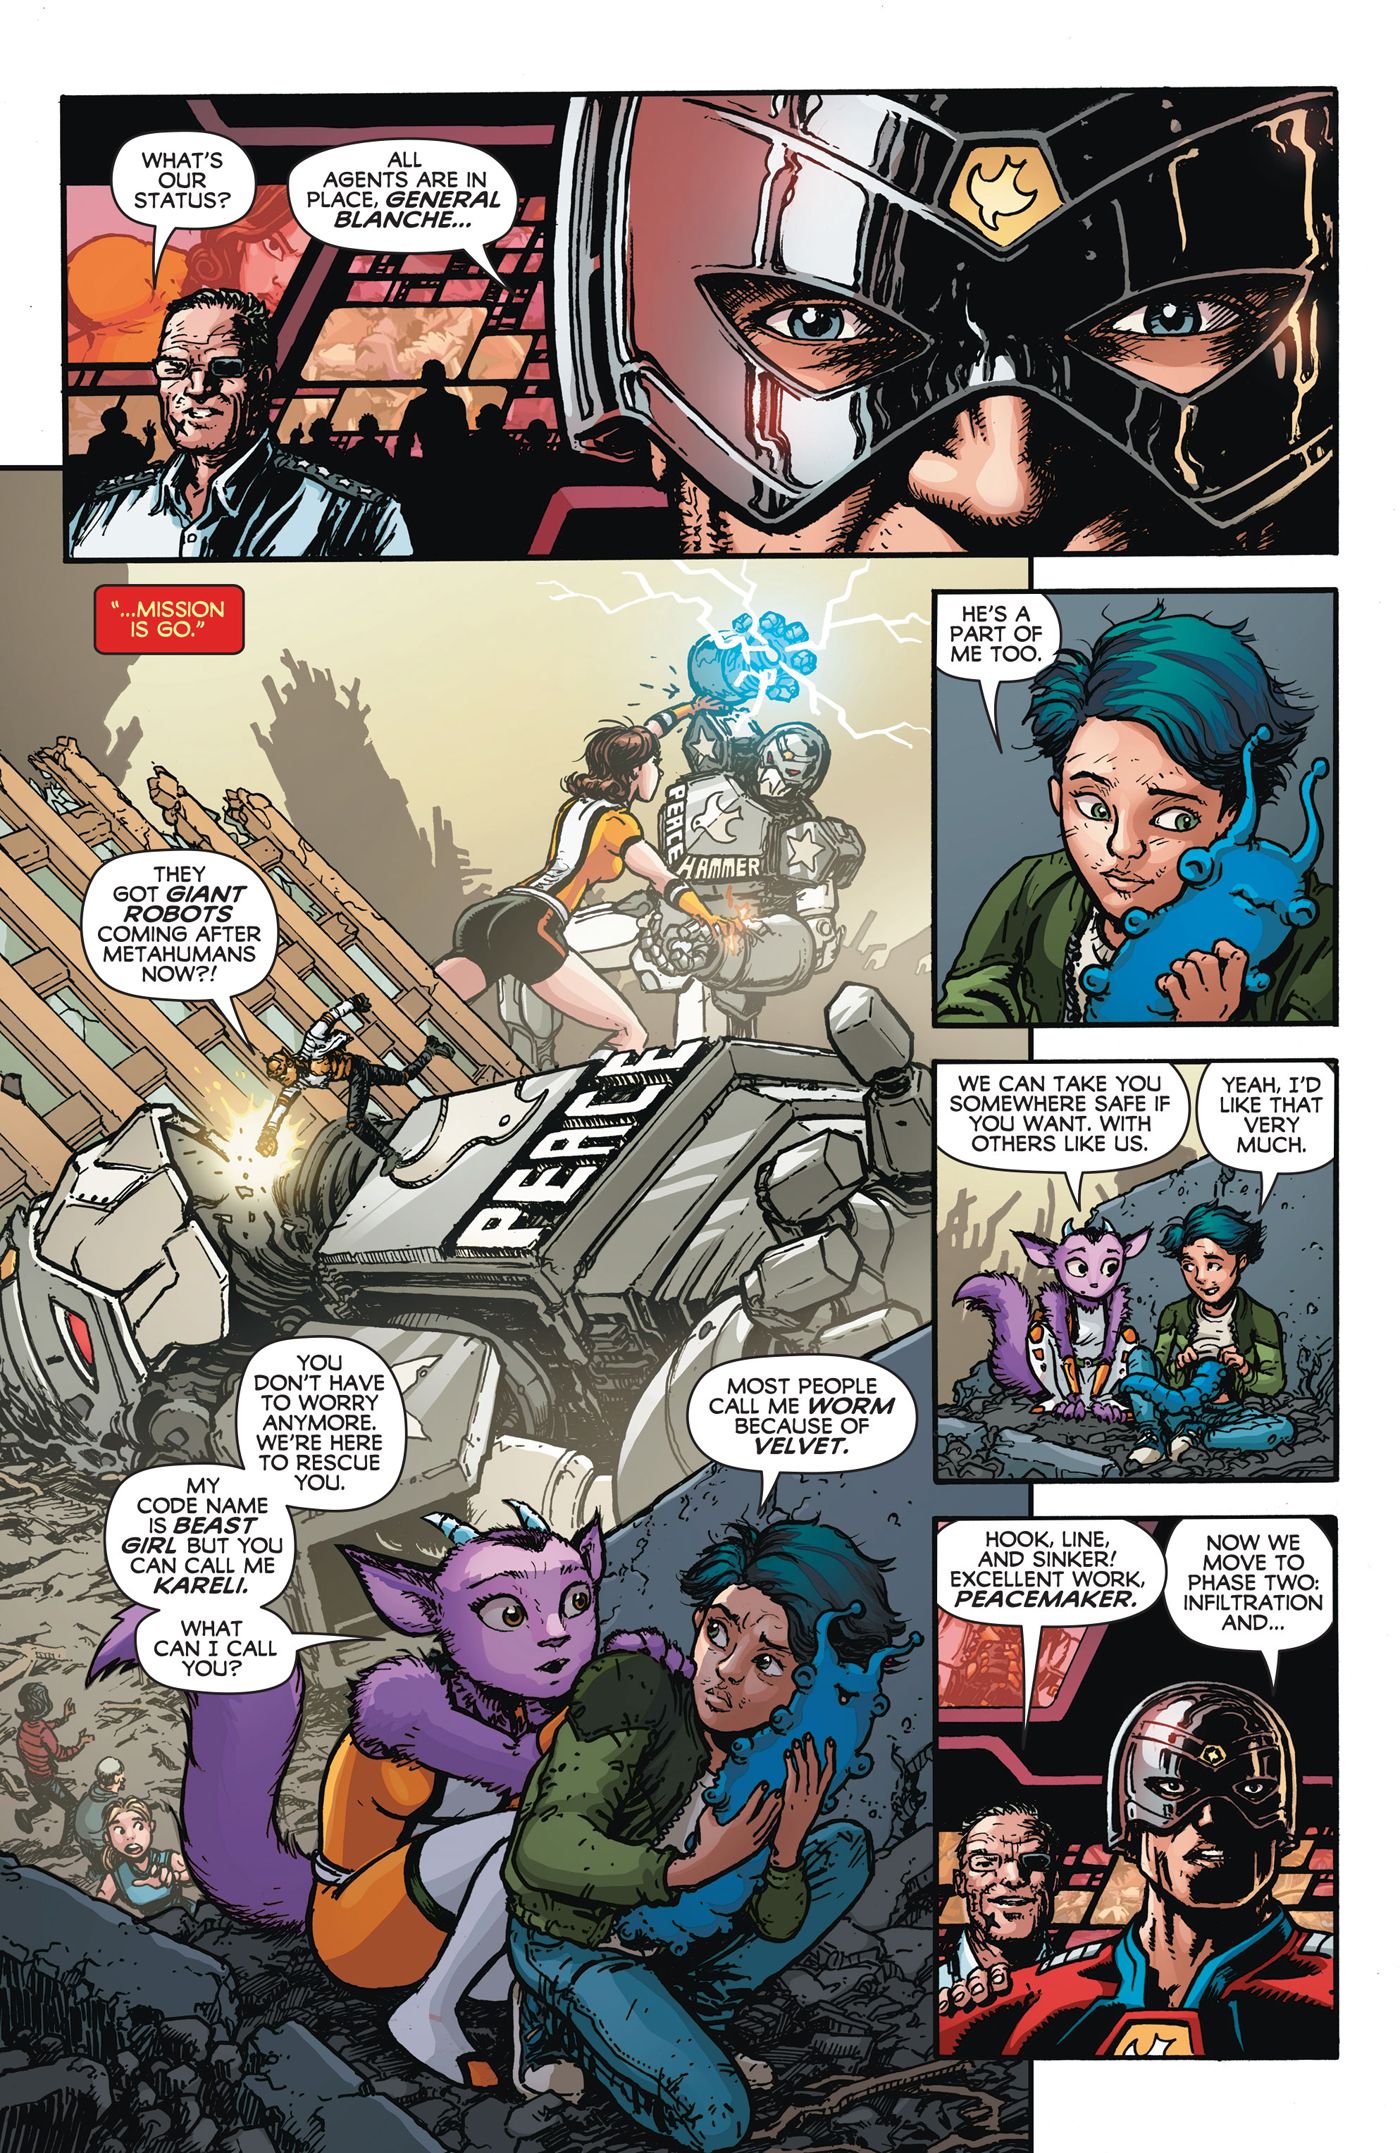 A look at Unstoppable Doom Patrol #2 (2023) from DC Comics.